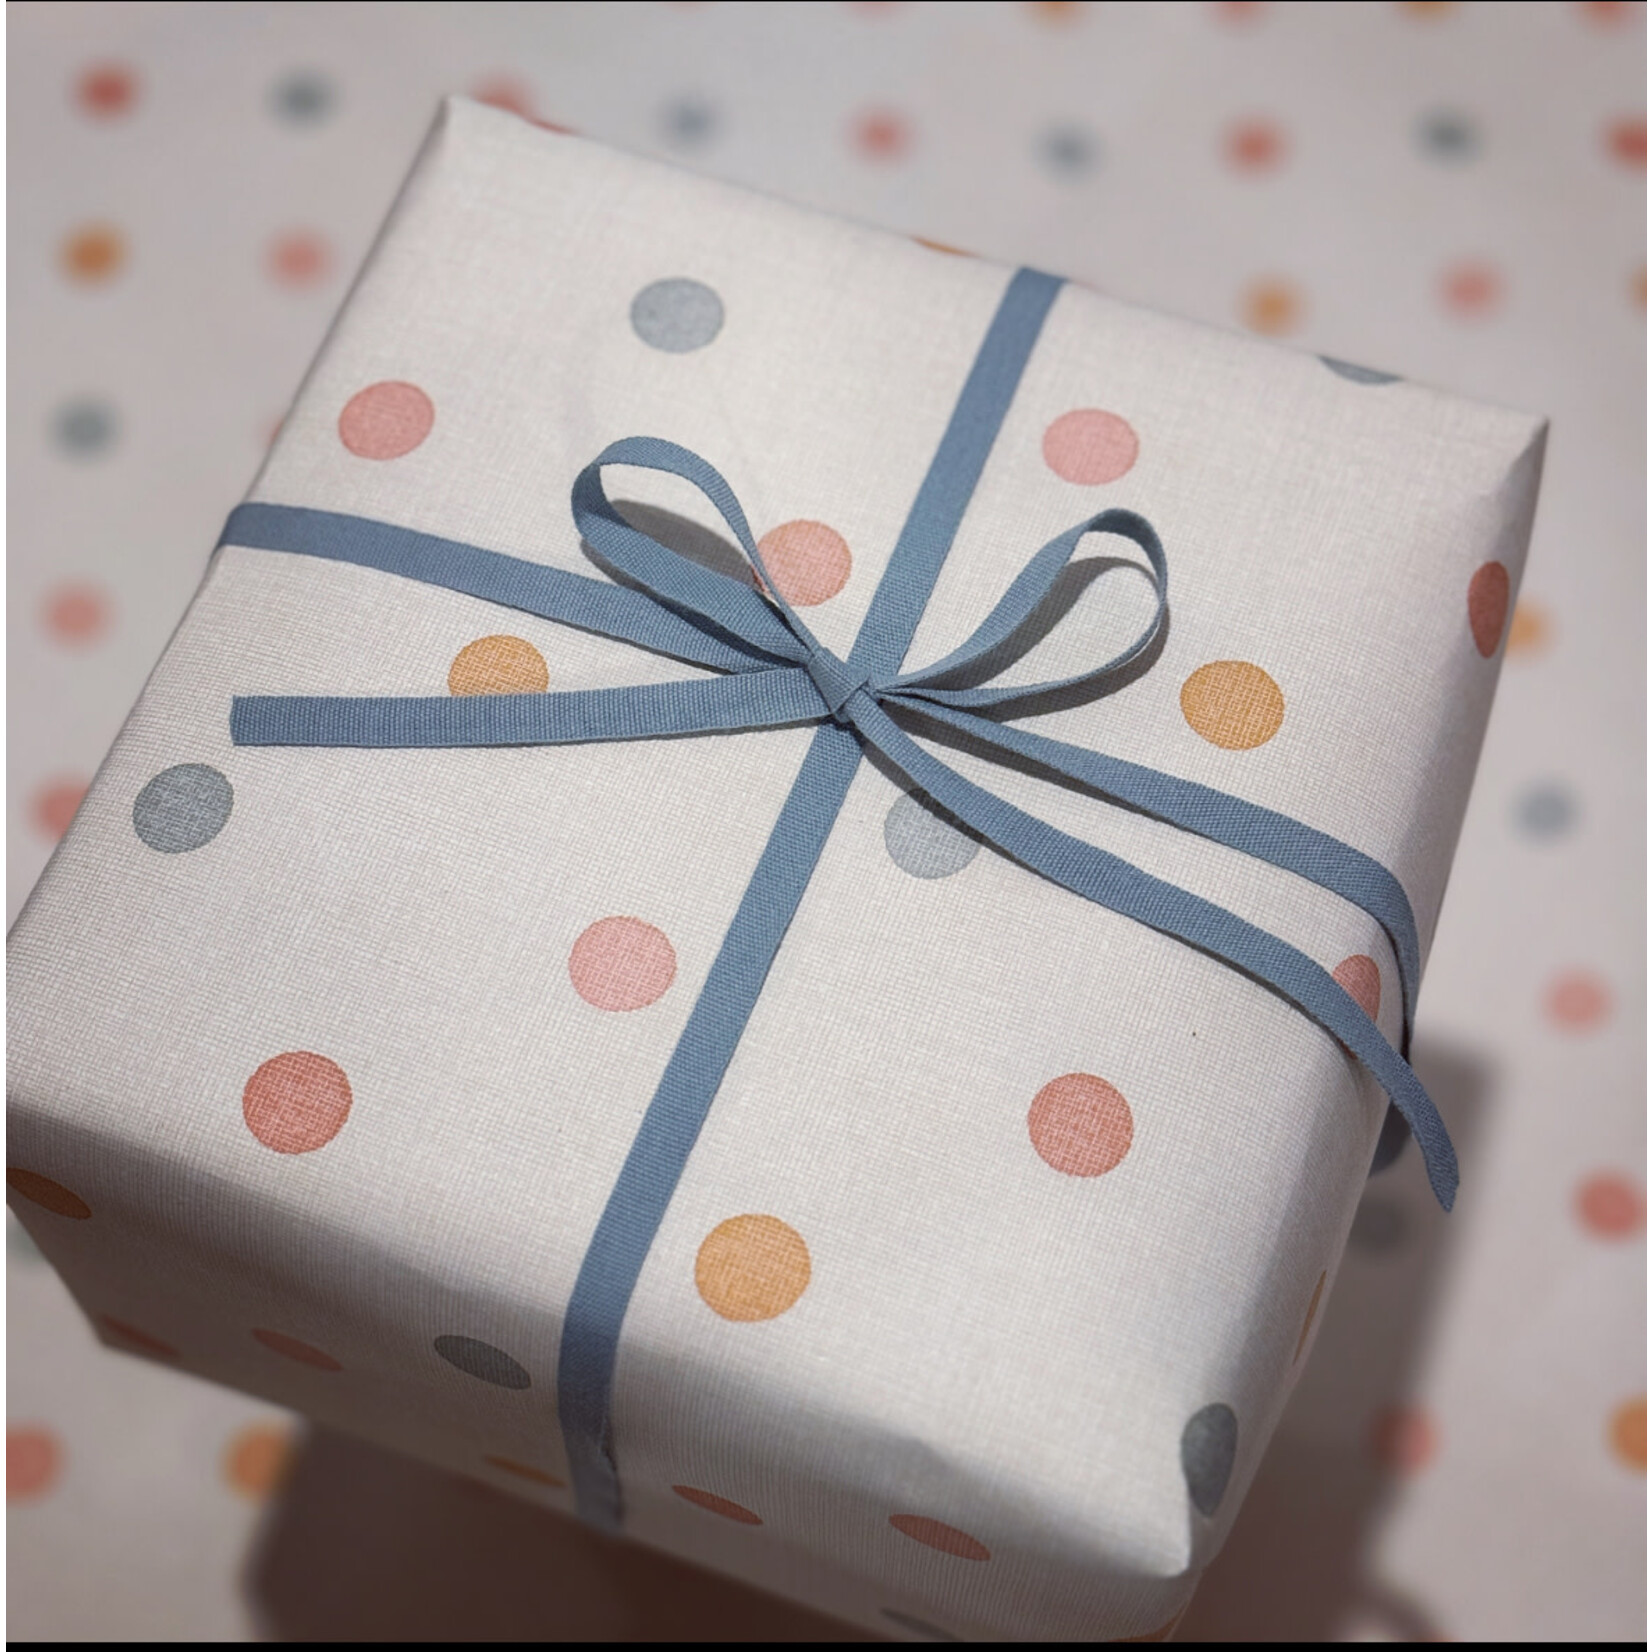 Would you like your items gift wrapped? - Spotty and ribbon